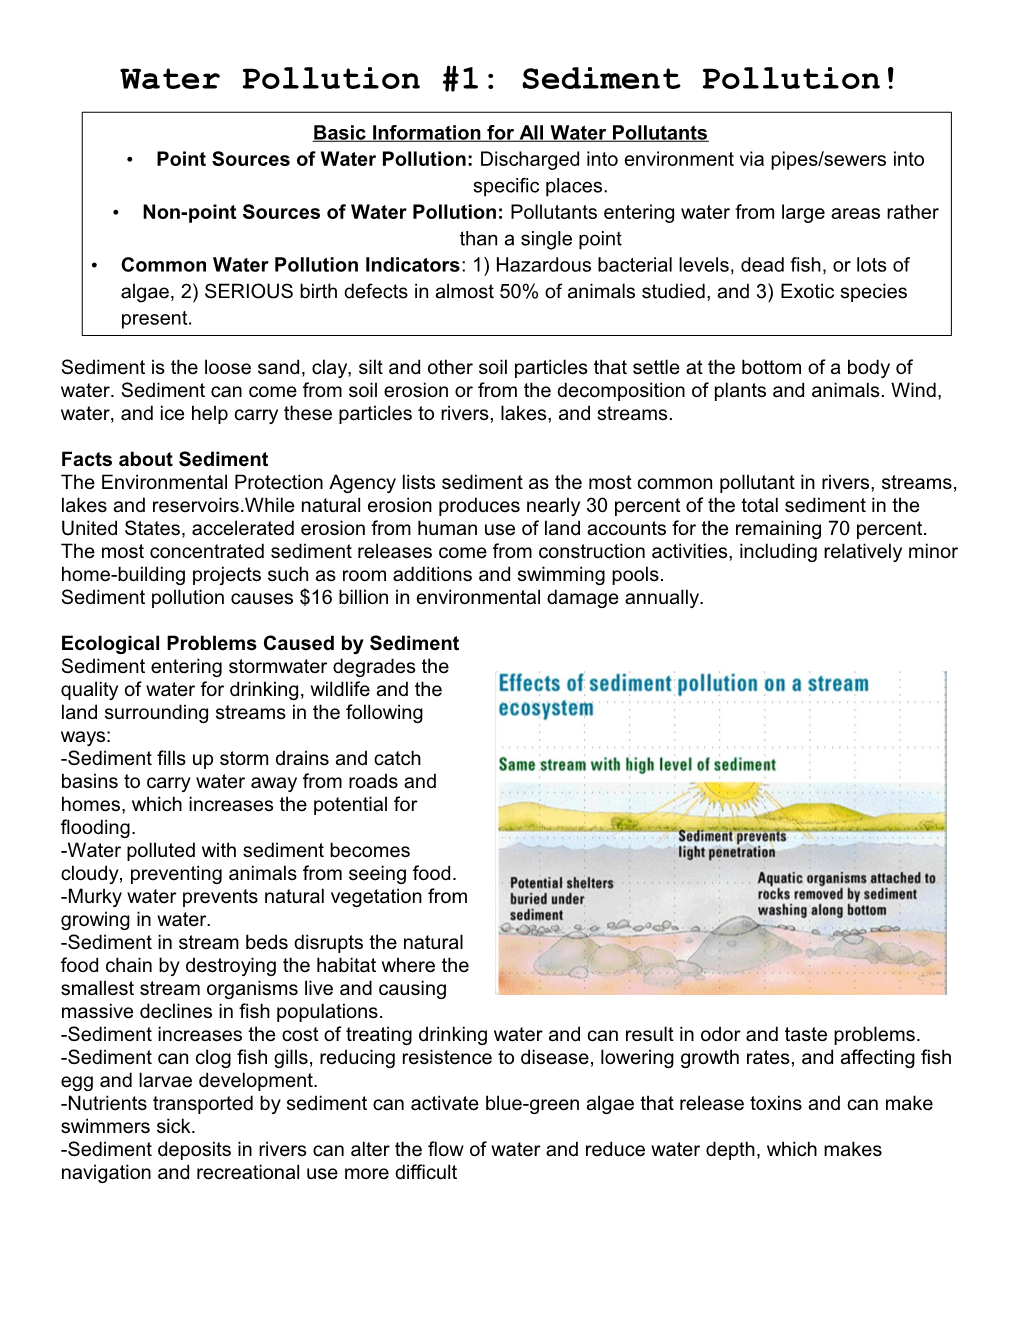 Basic Information for All Water Pollutants